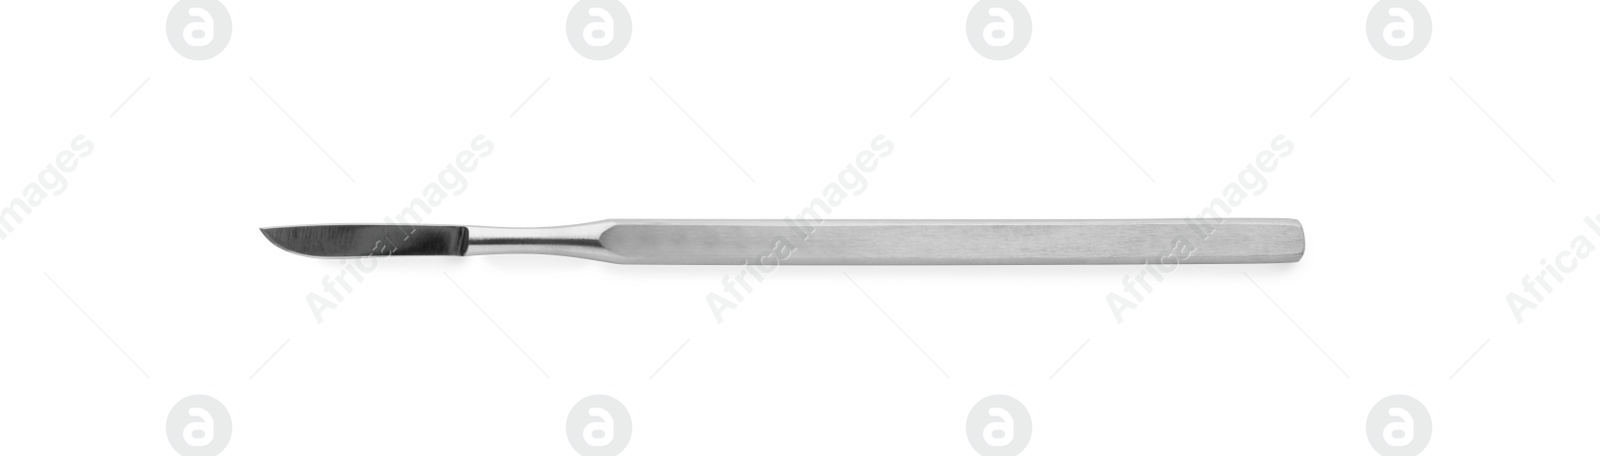 Photo of Stainless steel surgical scalpel isolated on white, top view. Dentist's tool